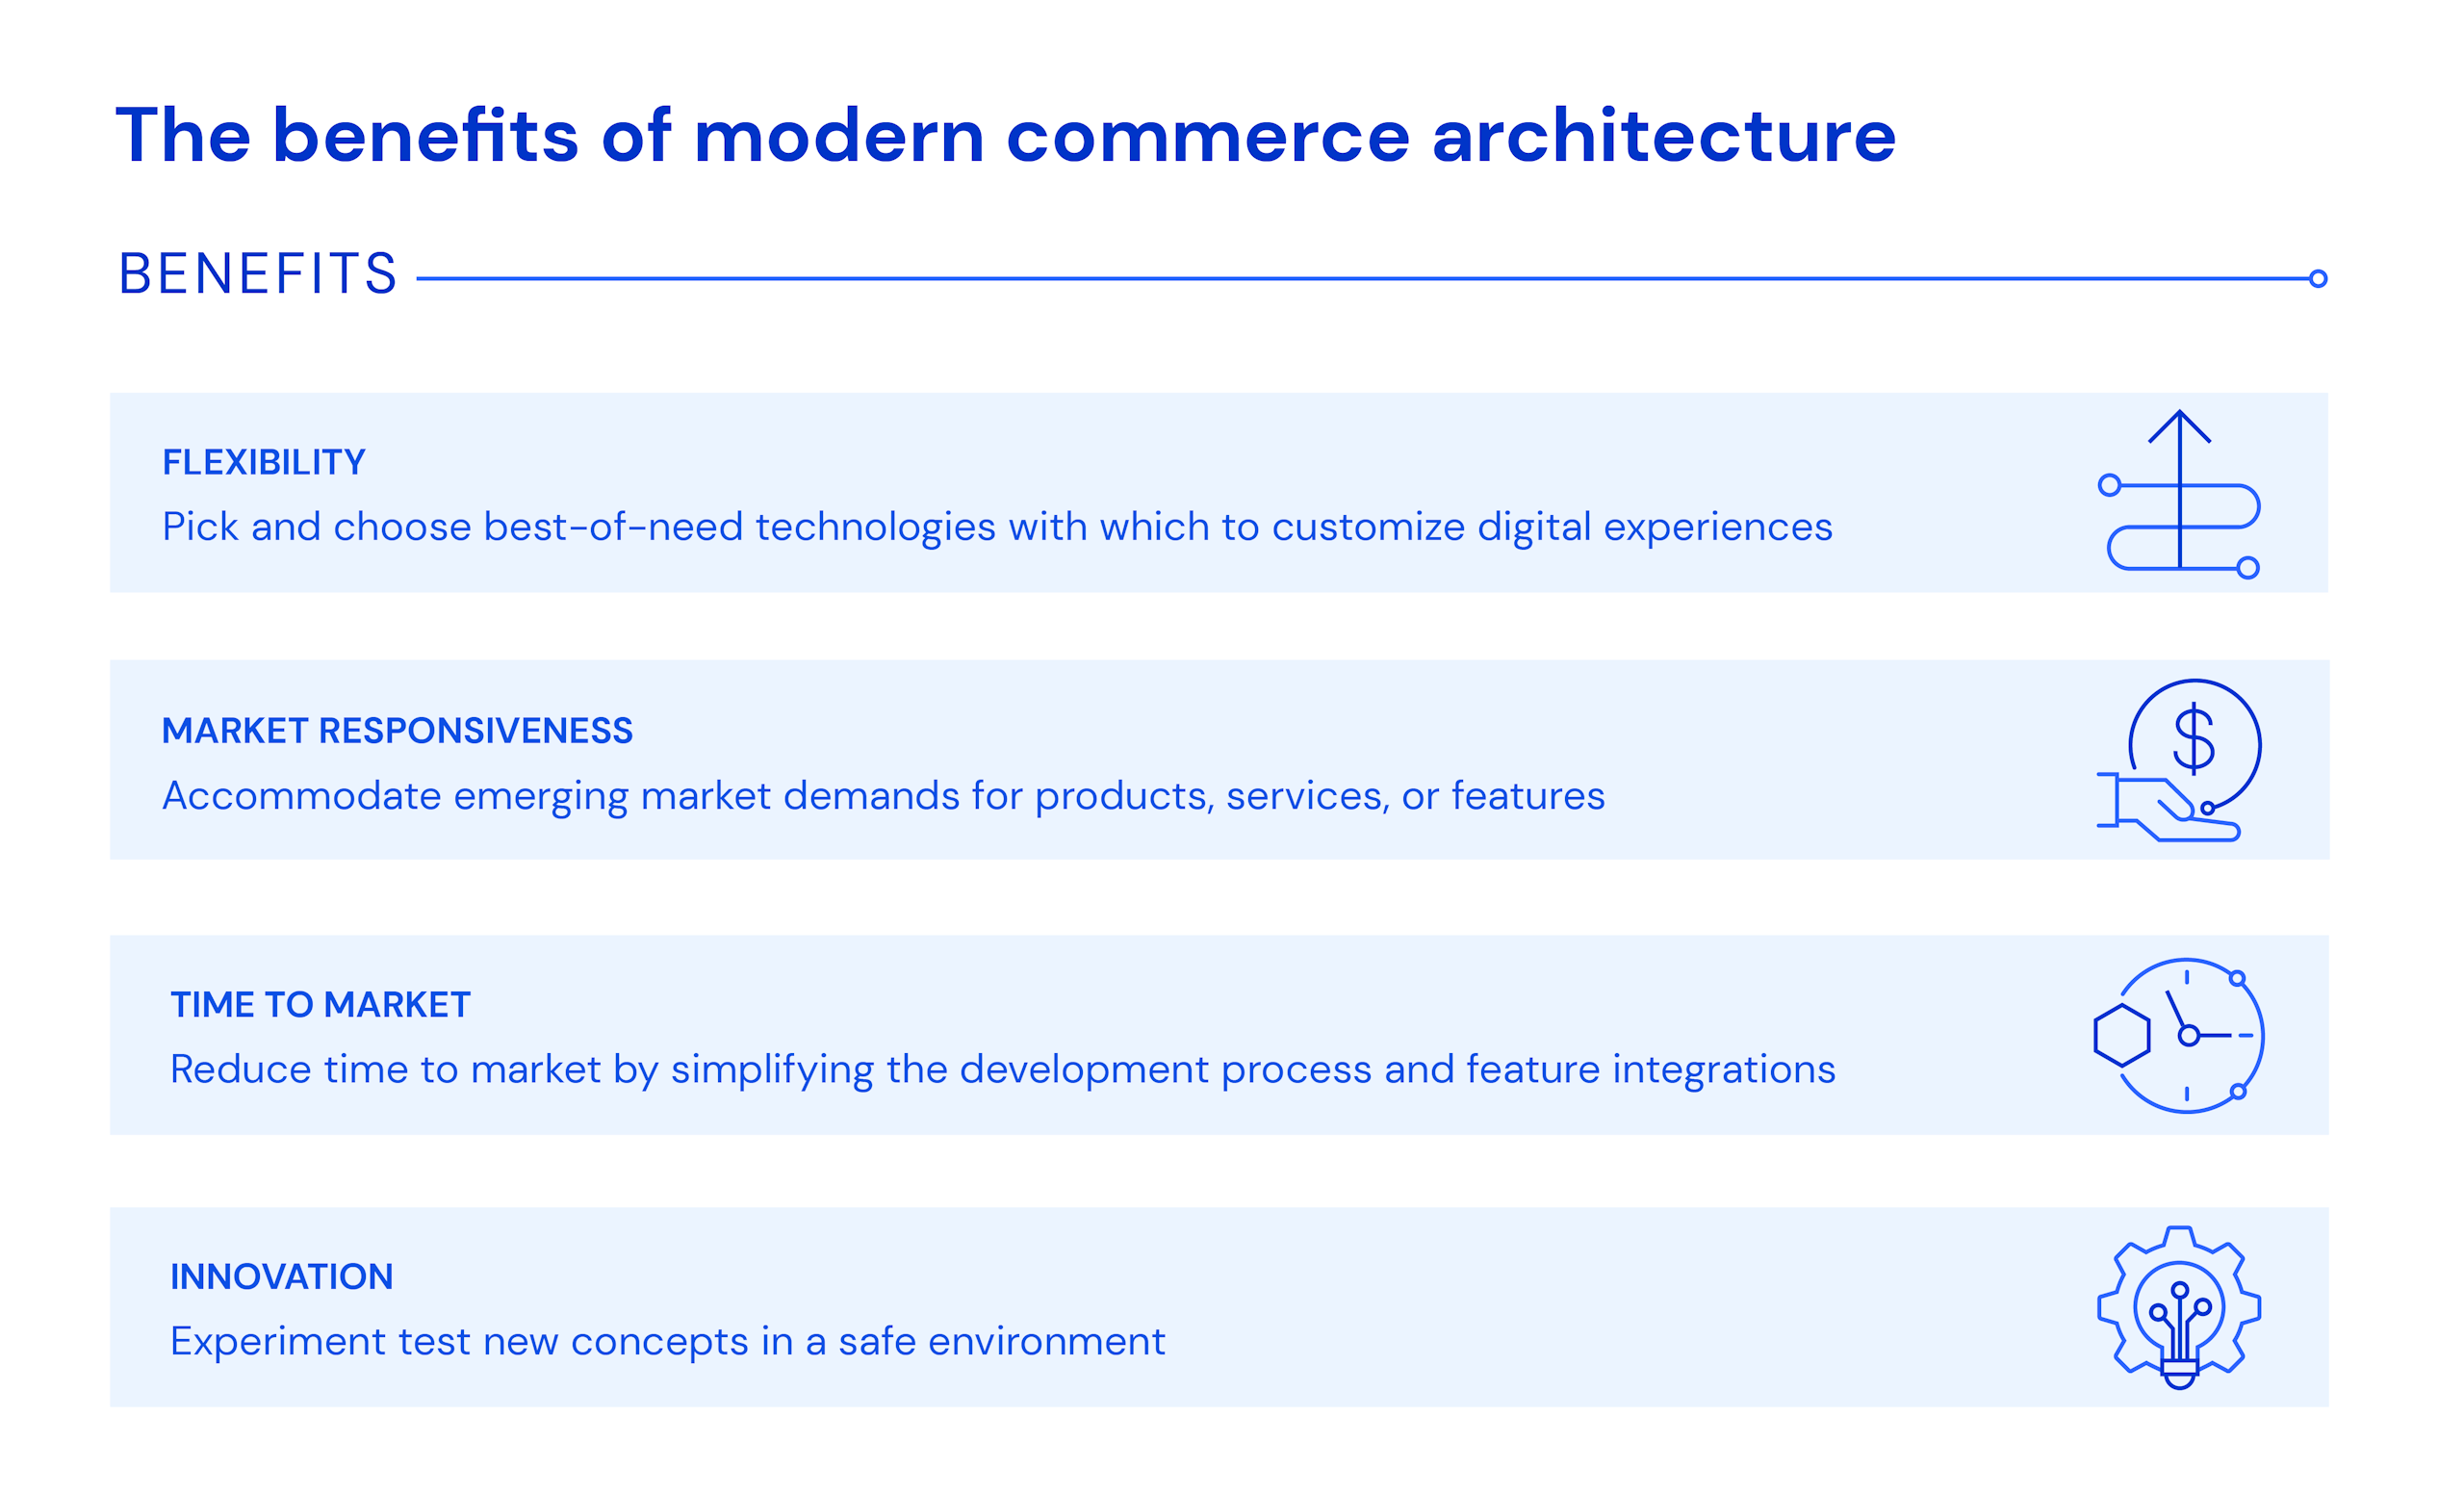 The benefits of modern commerce architecture